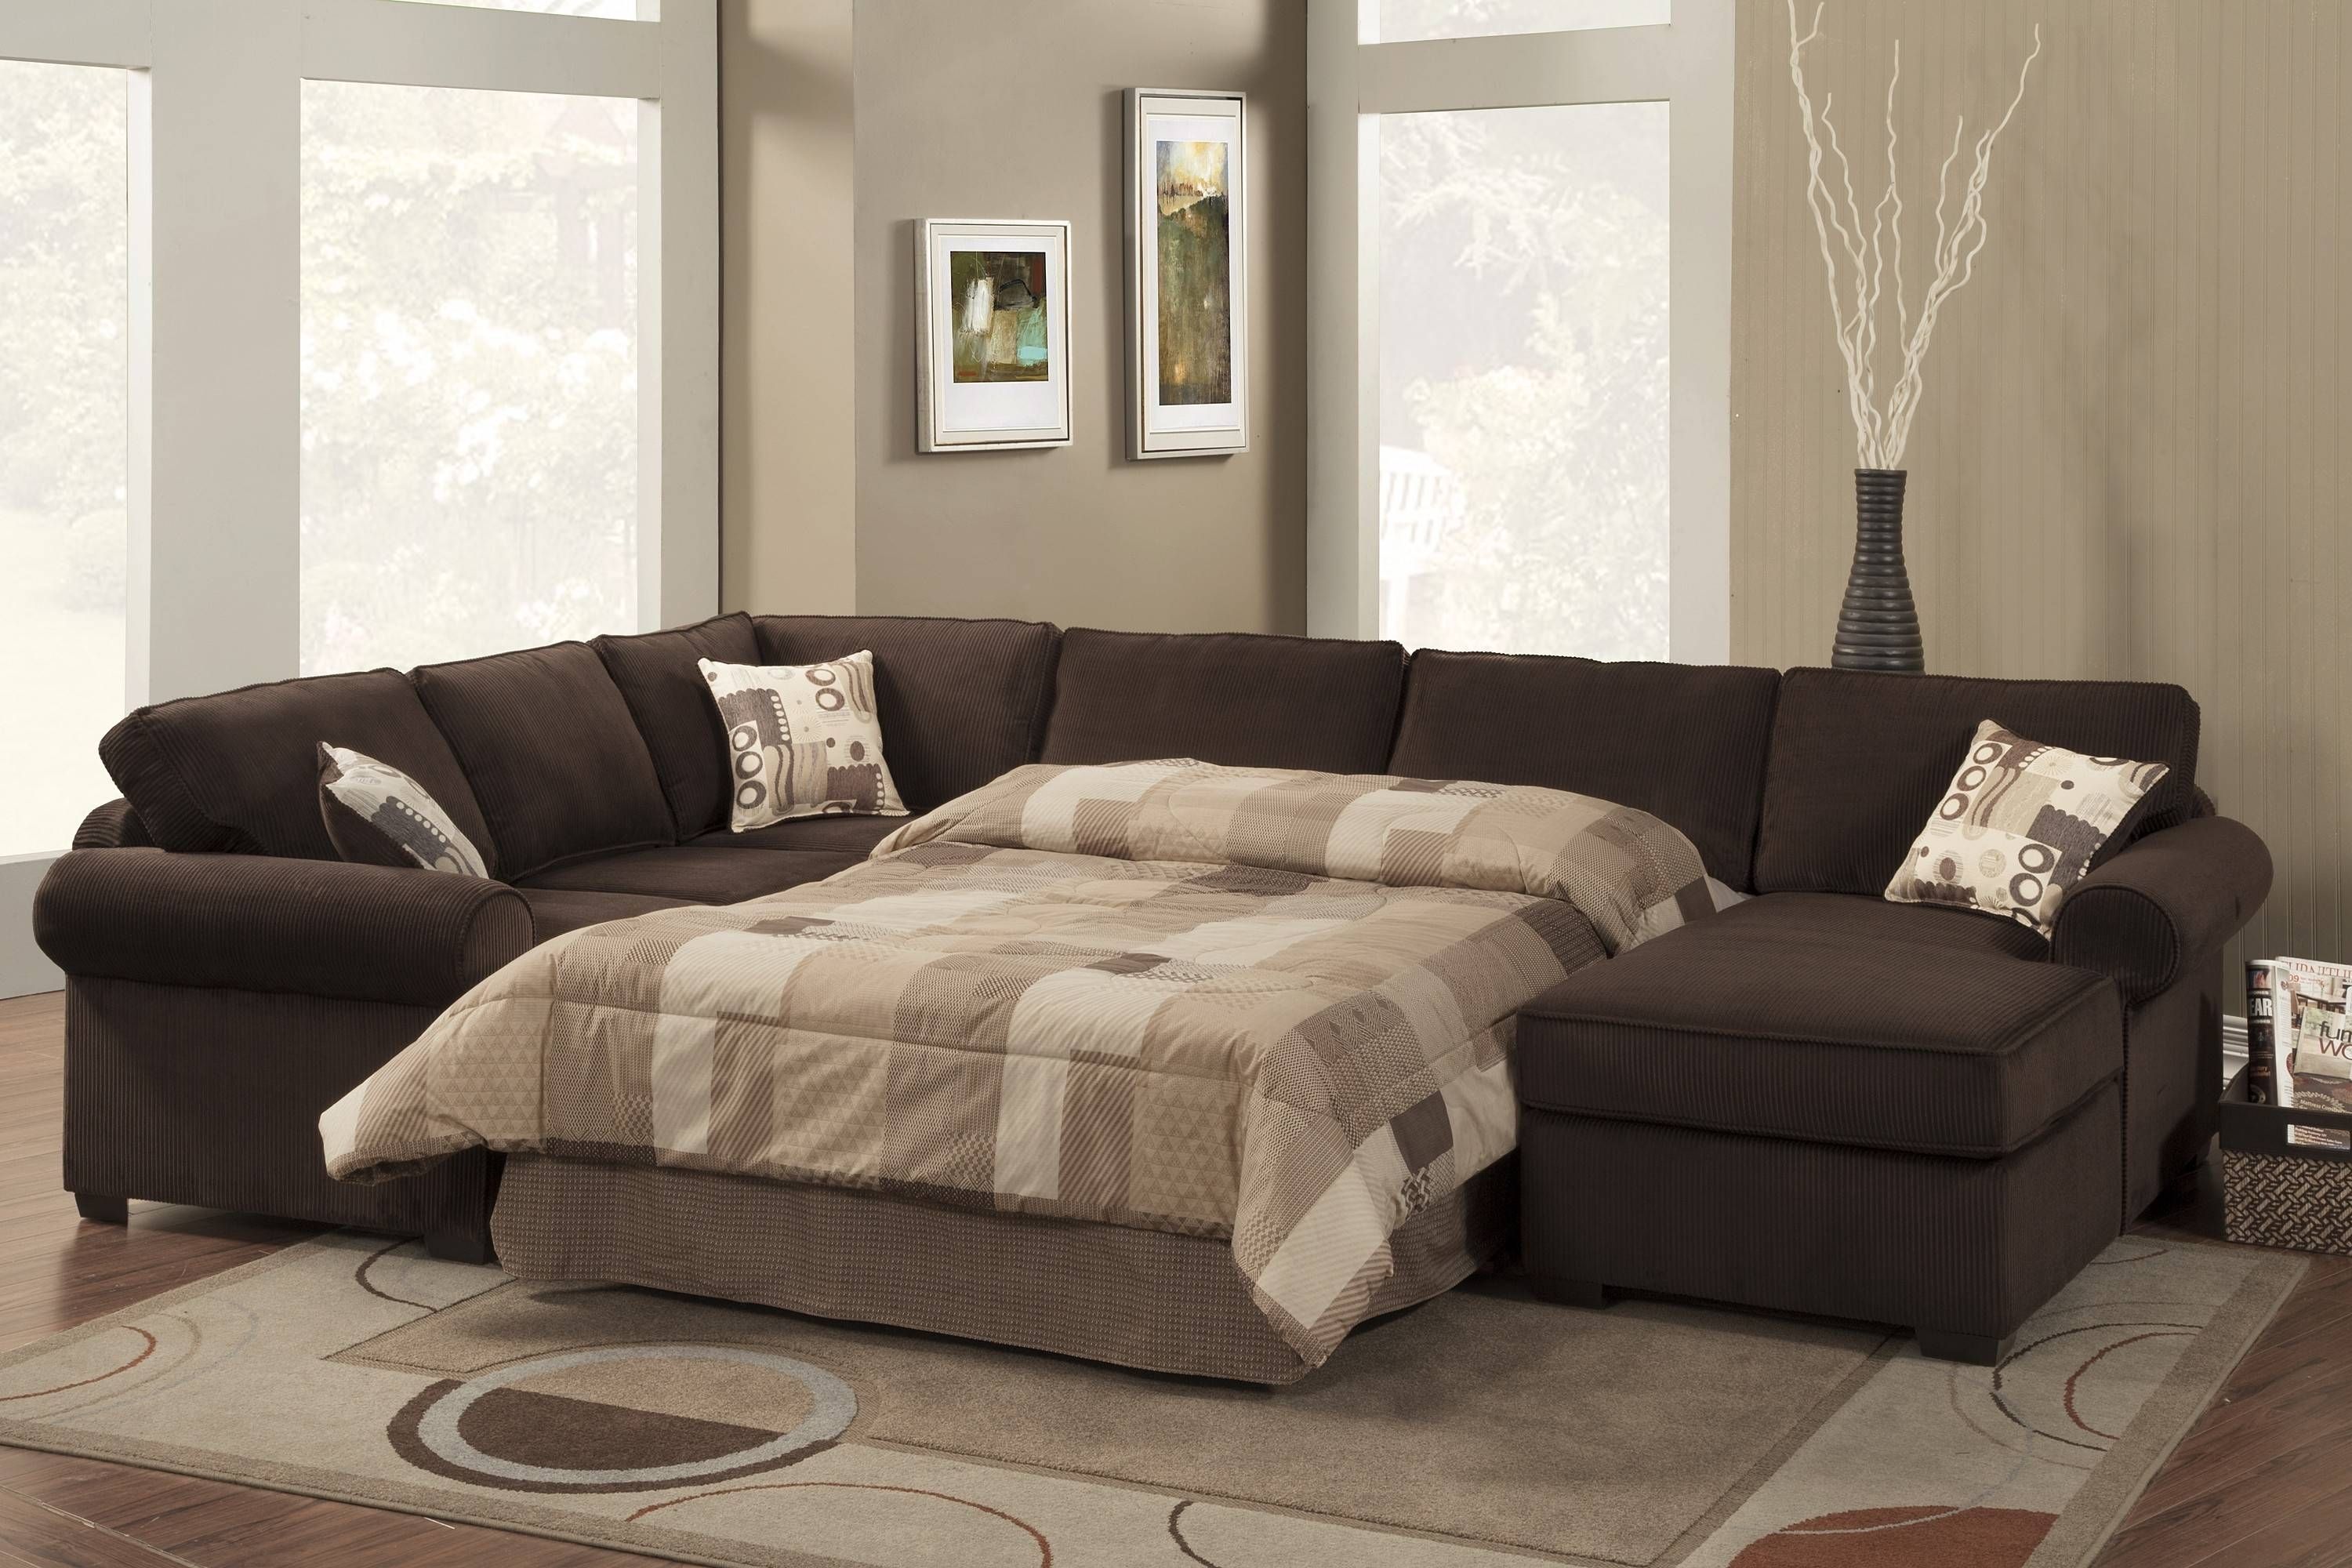 Sofa: Comfort And Style Is Evident In This Dynamic With Tufted Within Microsuede Sectional Sofas (Photo 27 of 30)